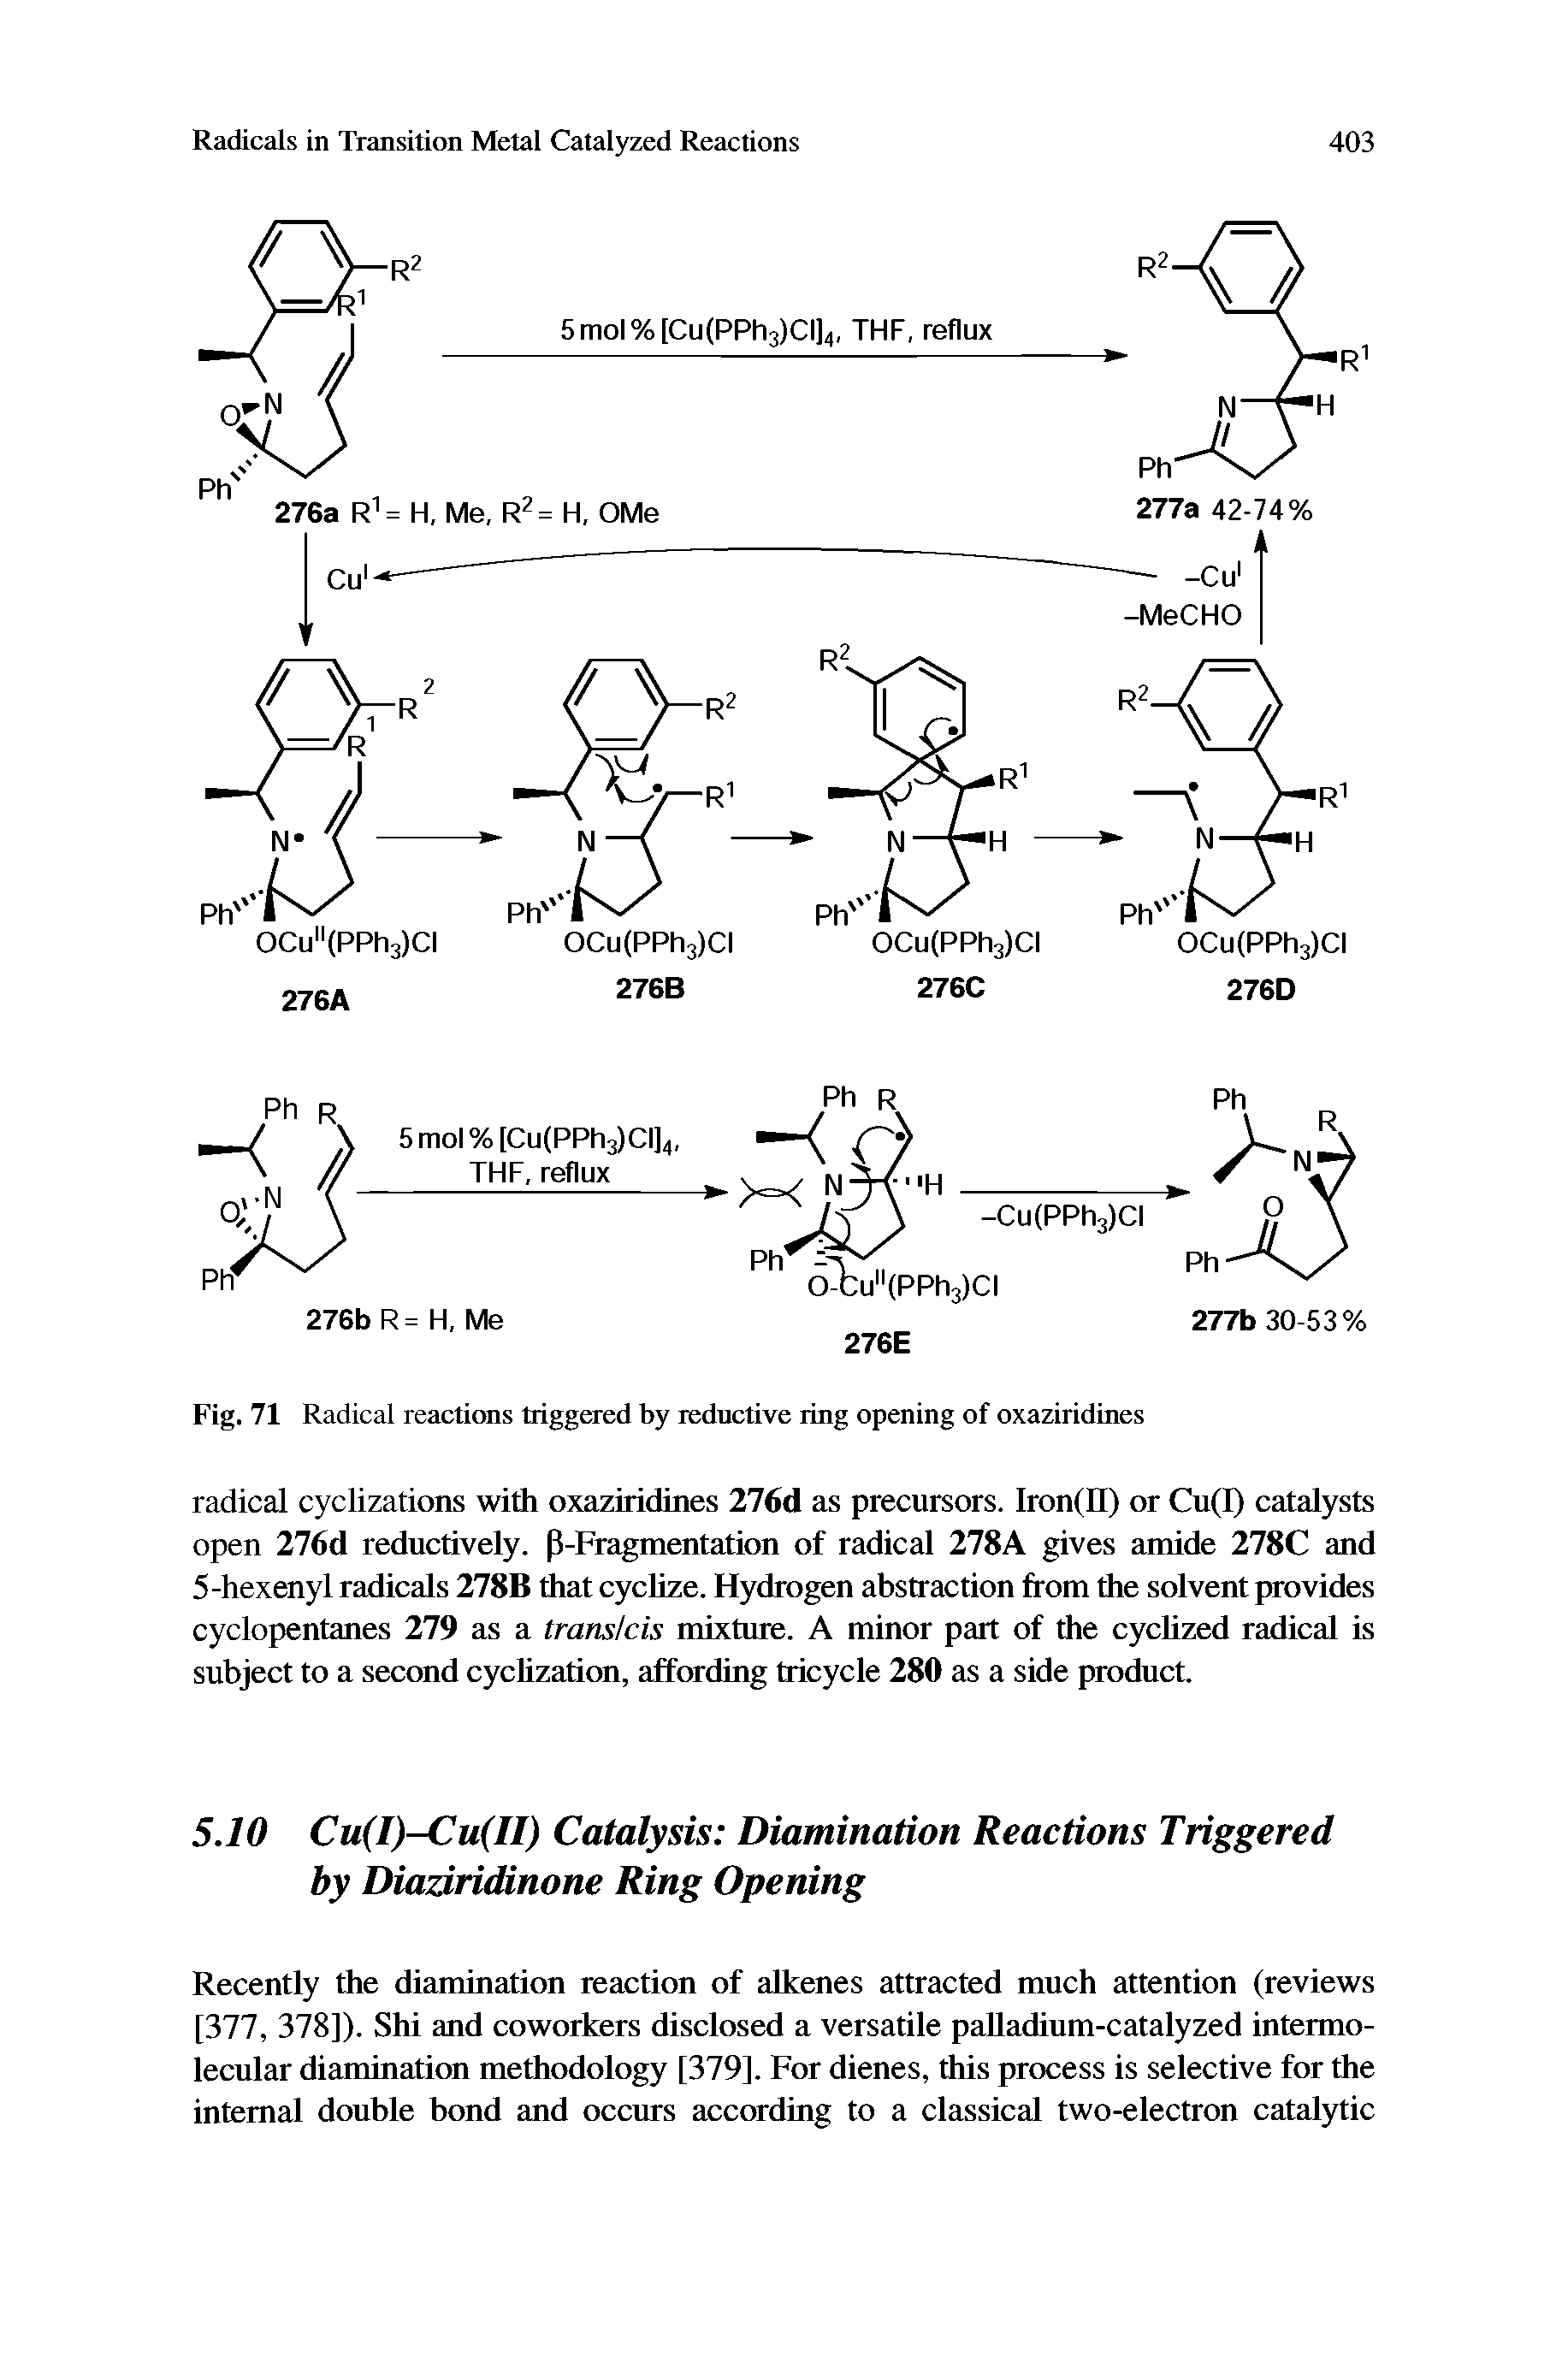 Fig. 71 Radical reactions triggered by reductive ring opening of oxaziridines...